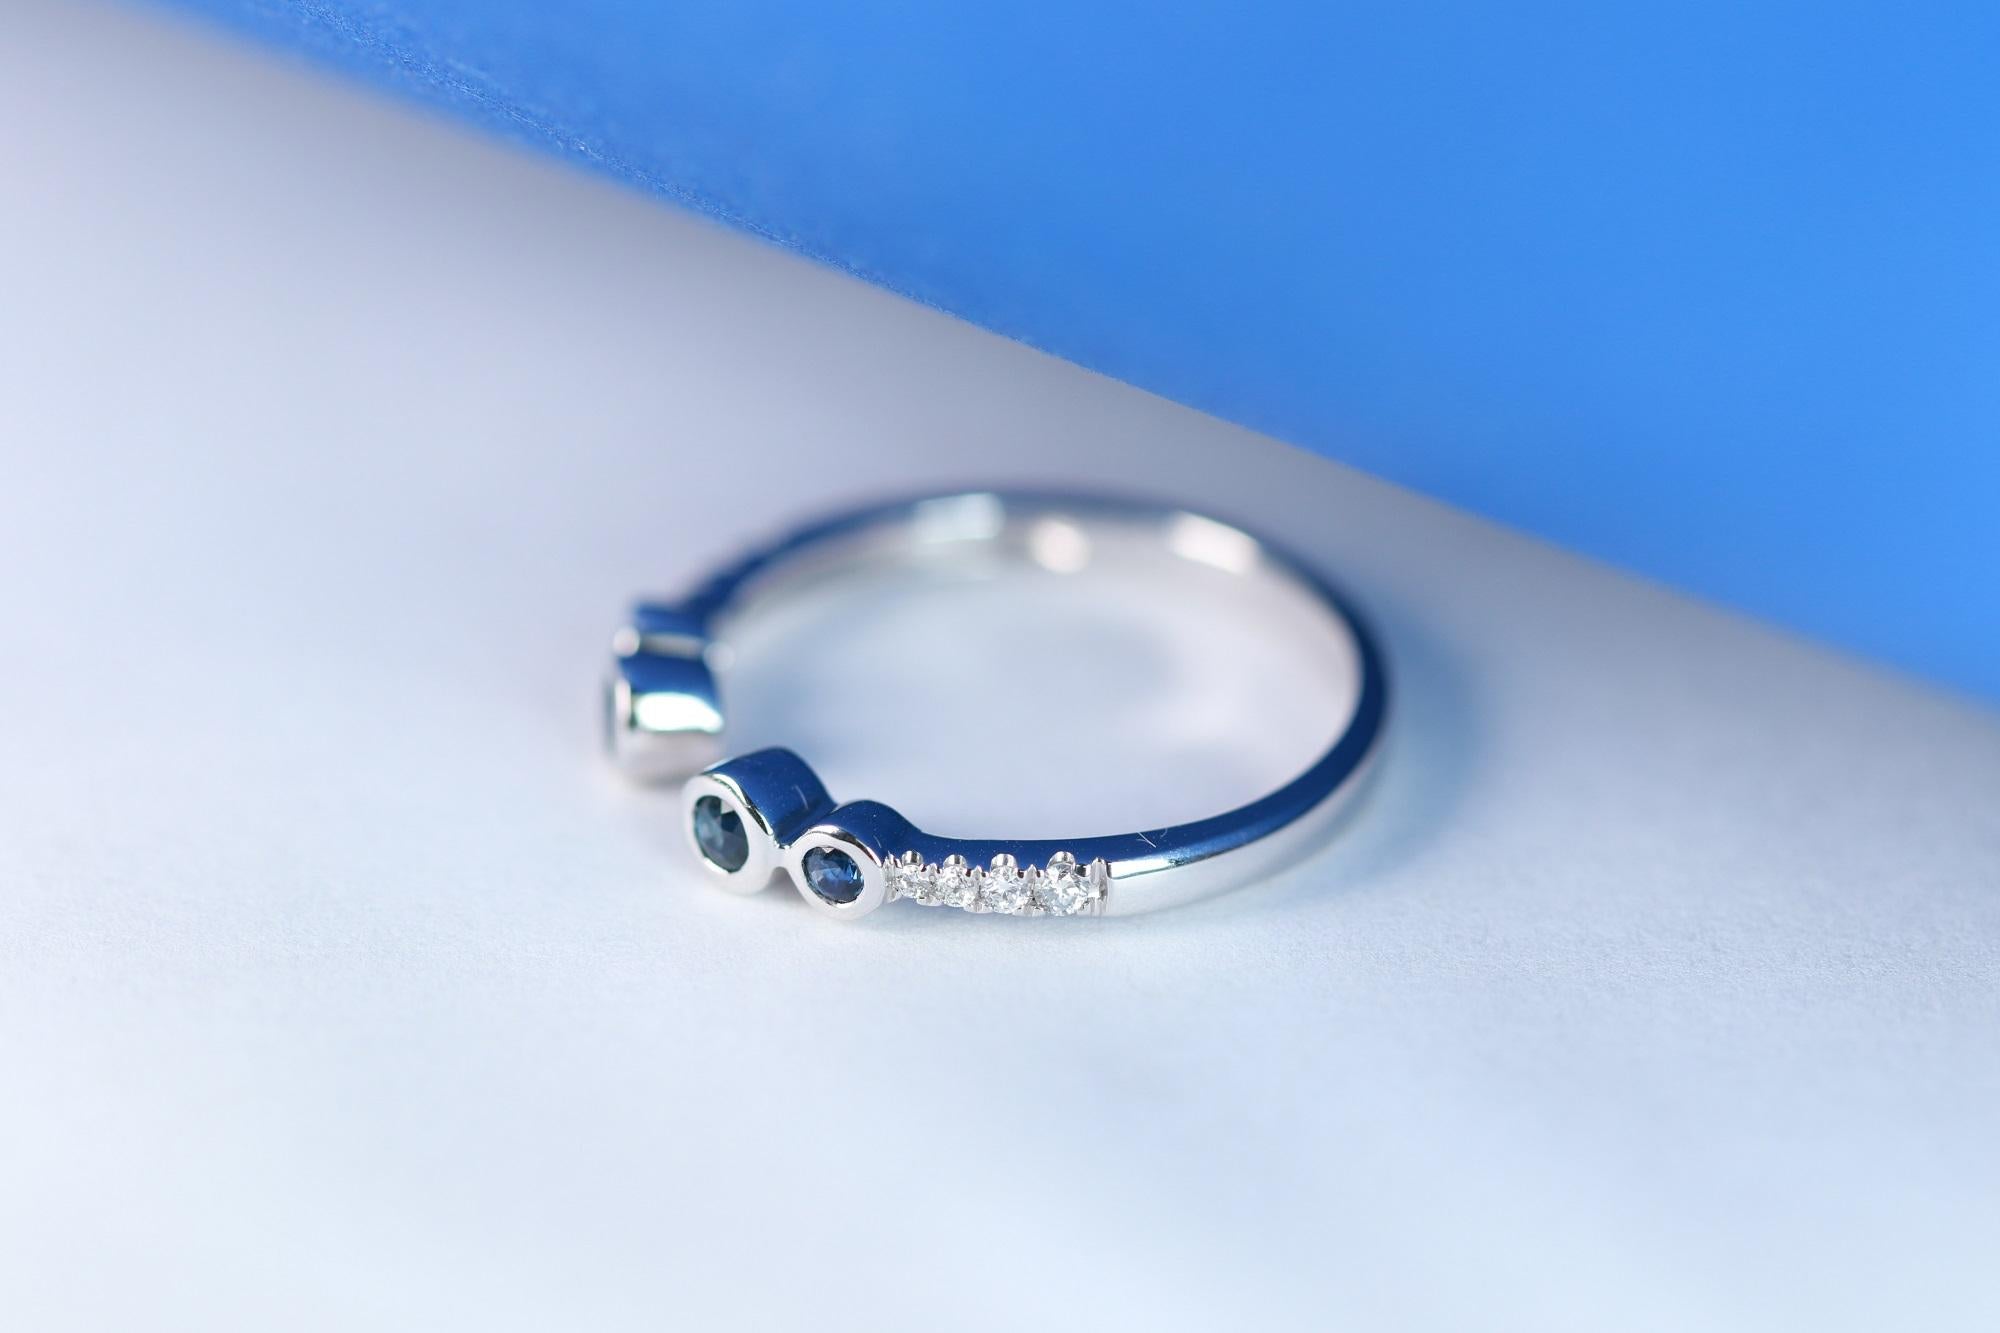 Stunning, timeless and classy eternity Unique Ring. Decorate yourself in luxury with this Gin & Grace Ring. The 18k White Gold jewelry boasts Round Cut Prong Setting Genuine Blue Sapphire (4 pcs) 0.29 Carat, along with Natural Round cut white